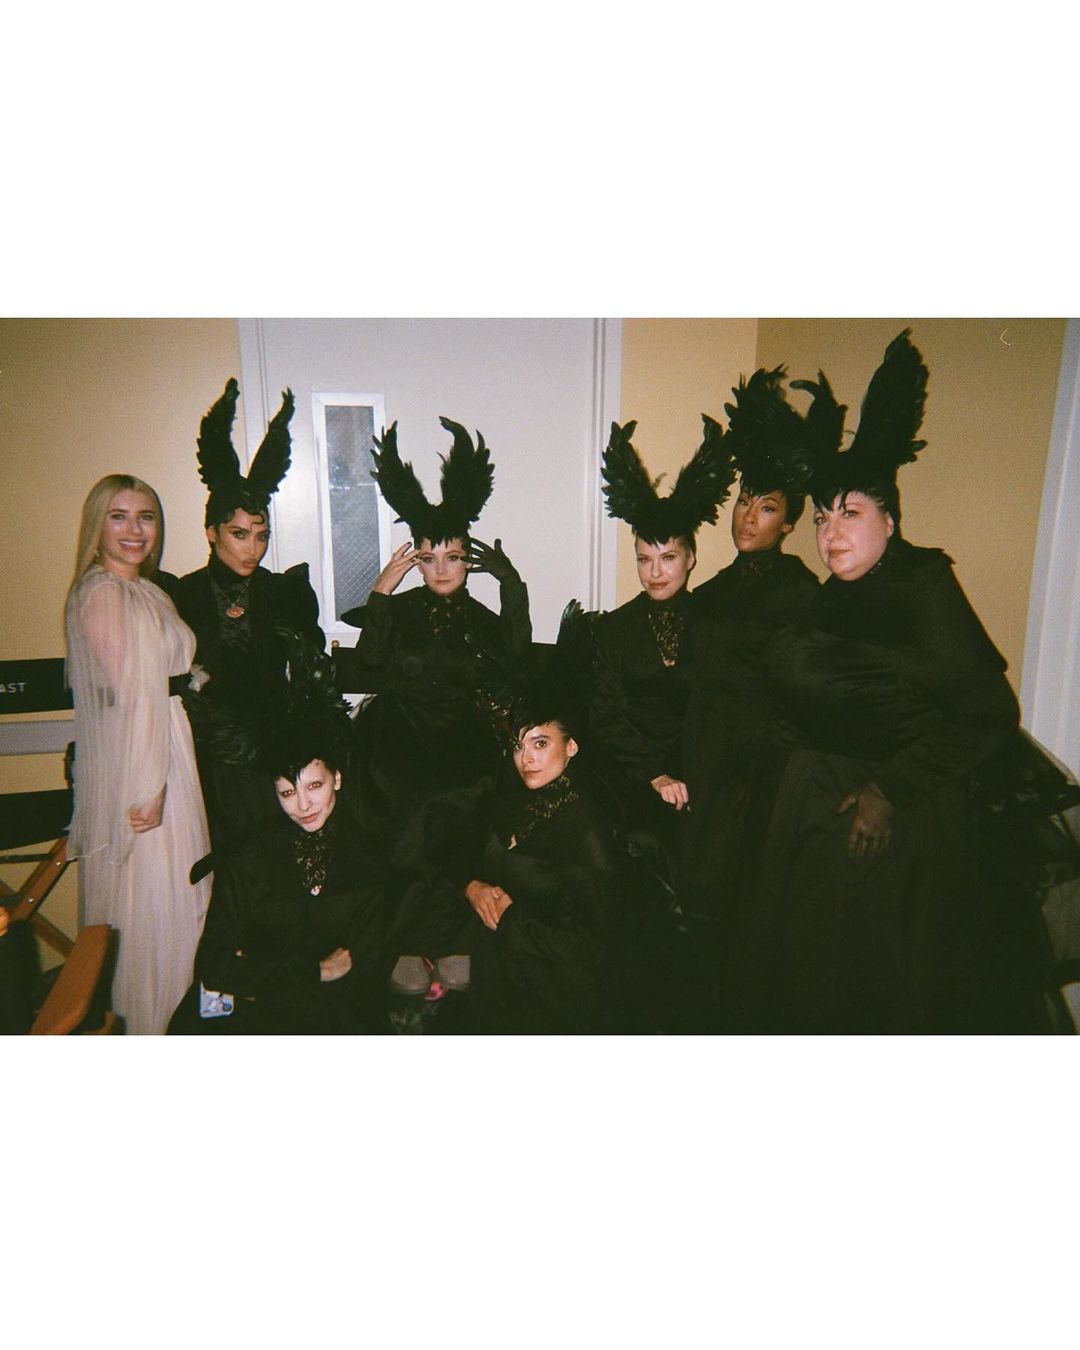 A backstage photo showed Kim, Kathy Bates, and several other castmates dressed up in the witches' garb while posing with Emma